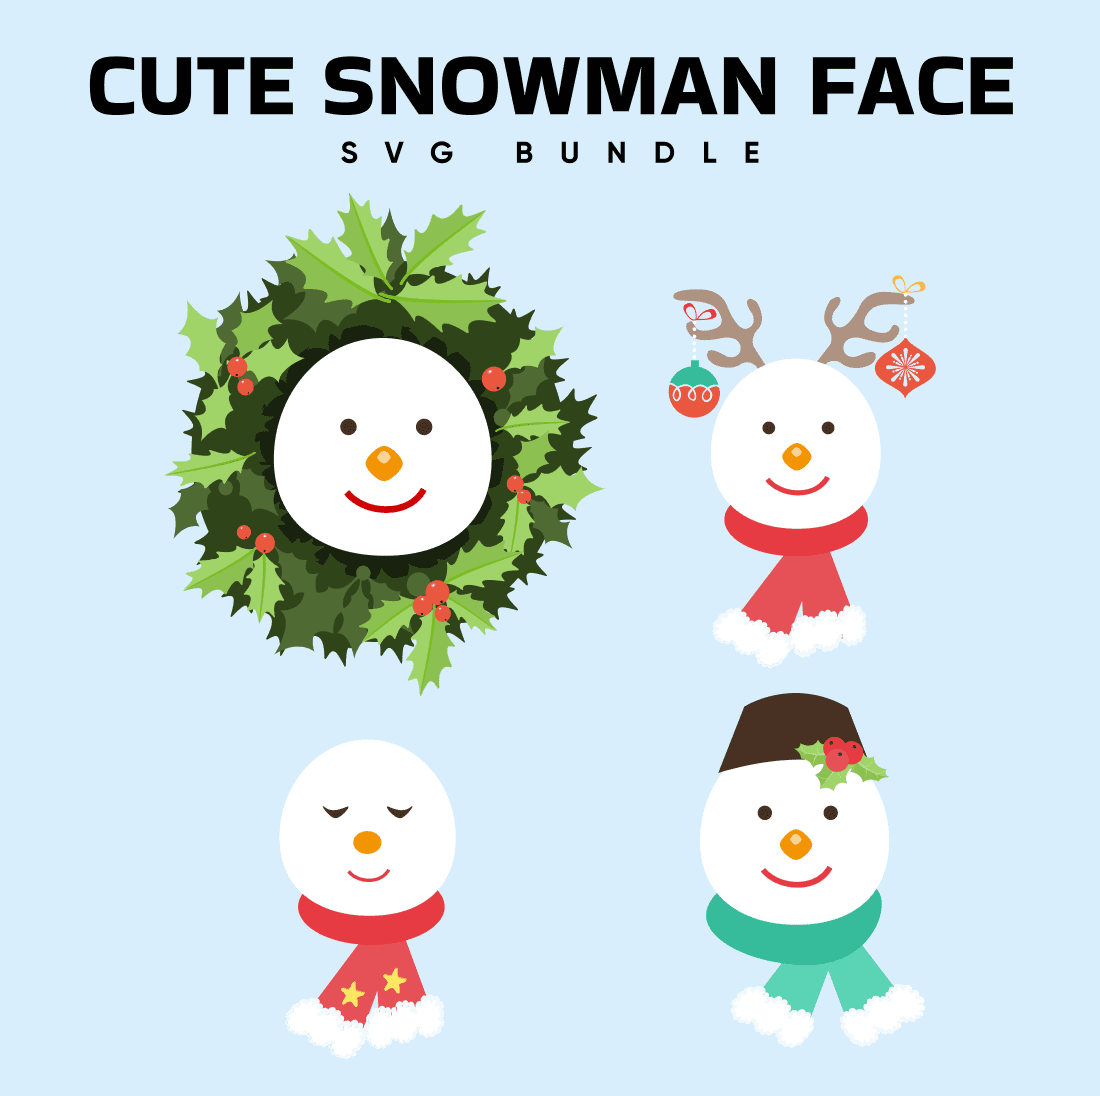 Images of snowmen's faces with a charming smile are decorated with Christmas things.